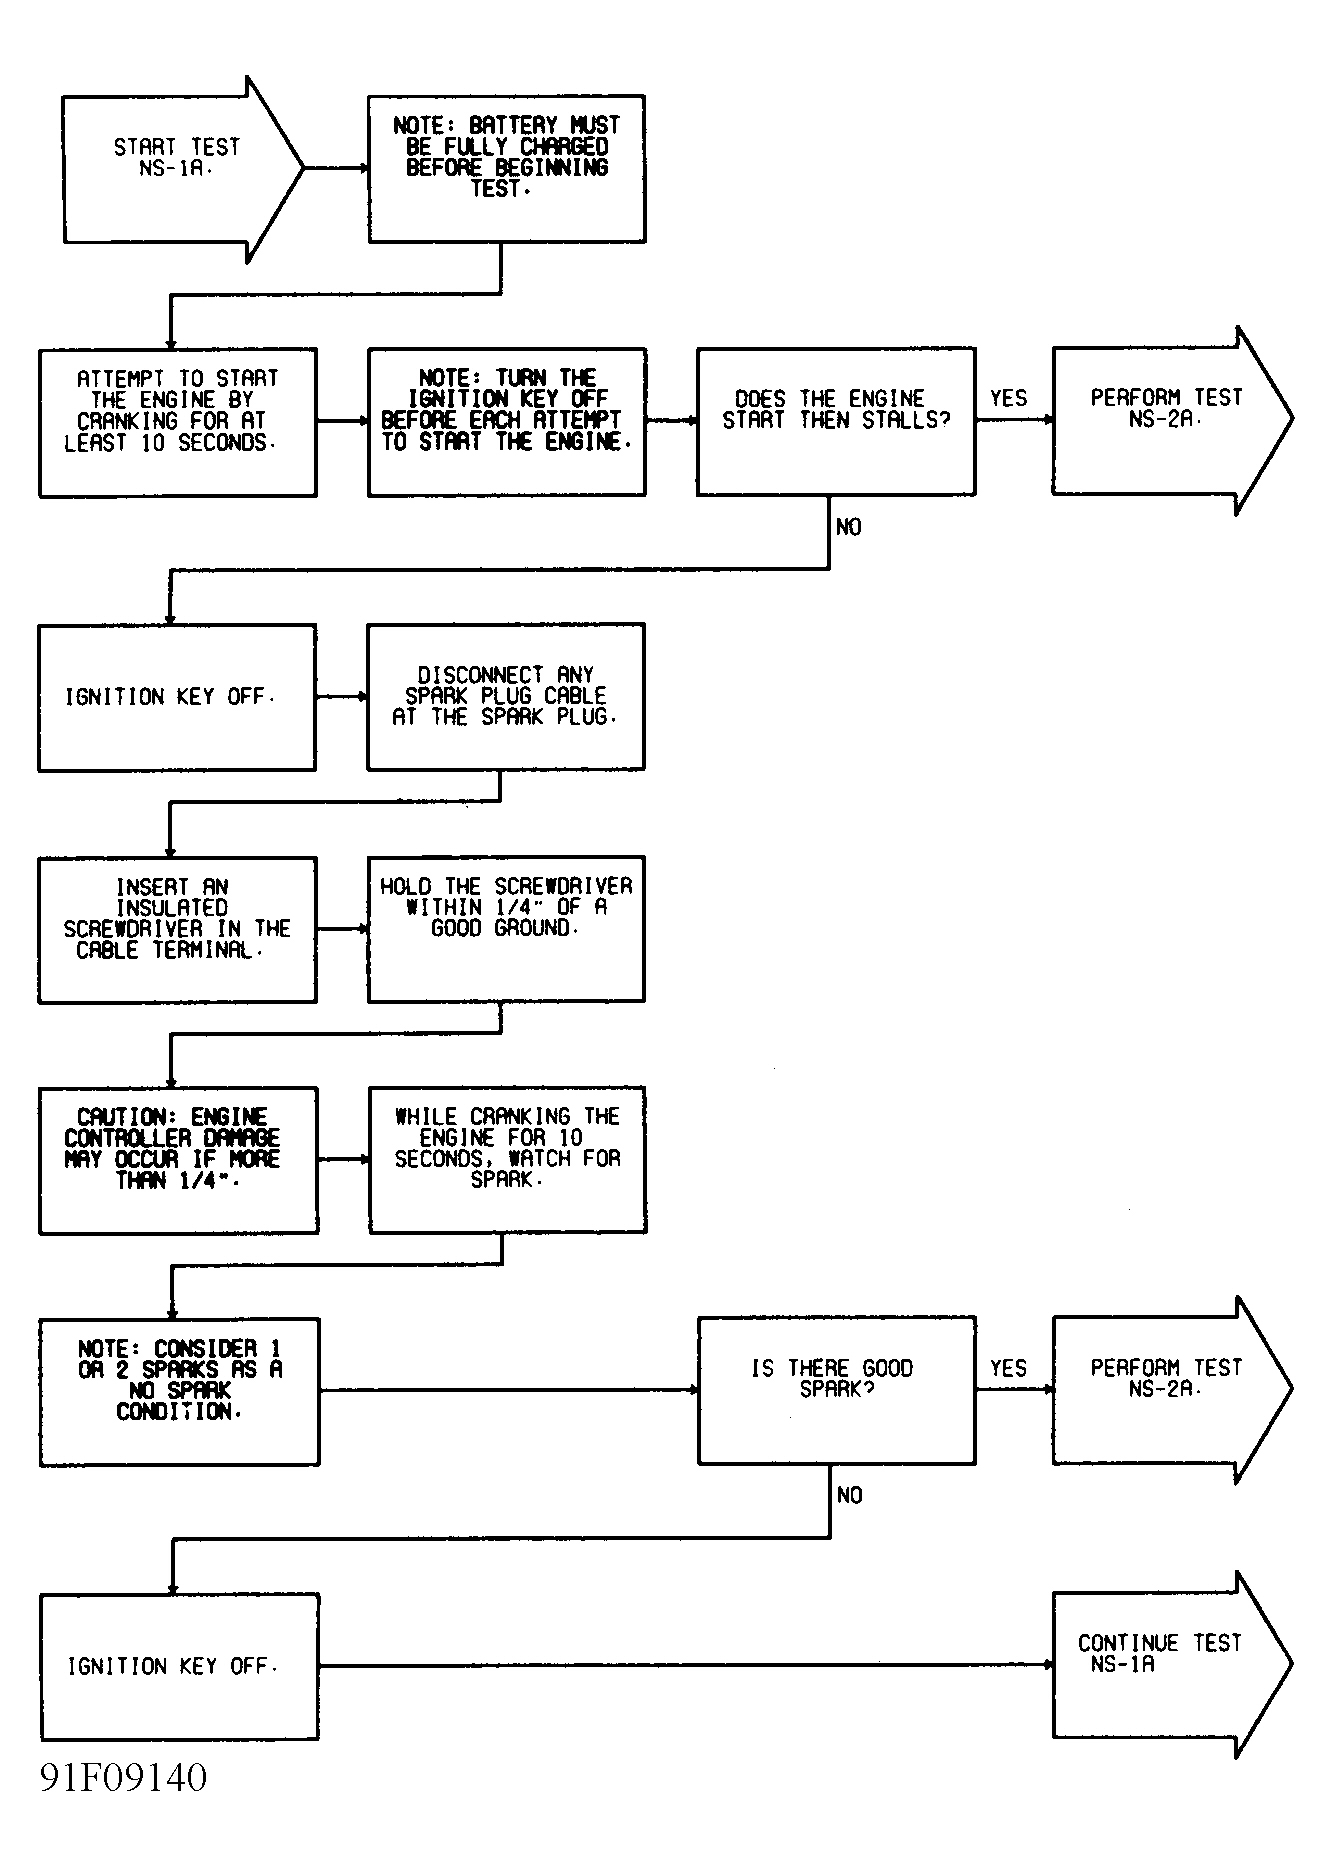 Chrysler New Yorker Fifth Avenue 1991 - Component Locations -  Test NS-1A: Flowchart (1 of 4)